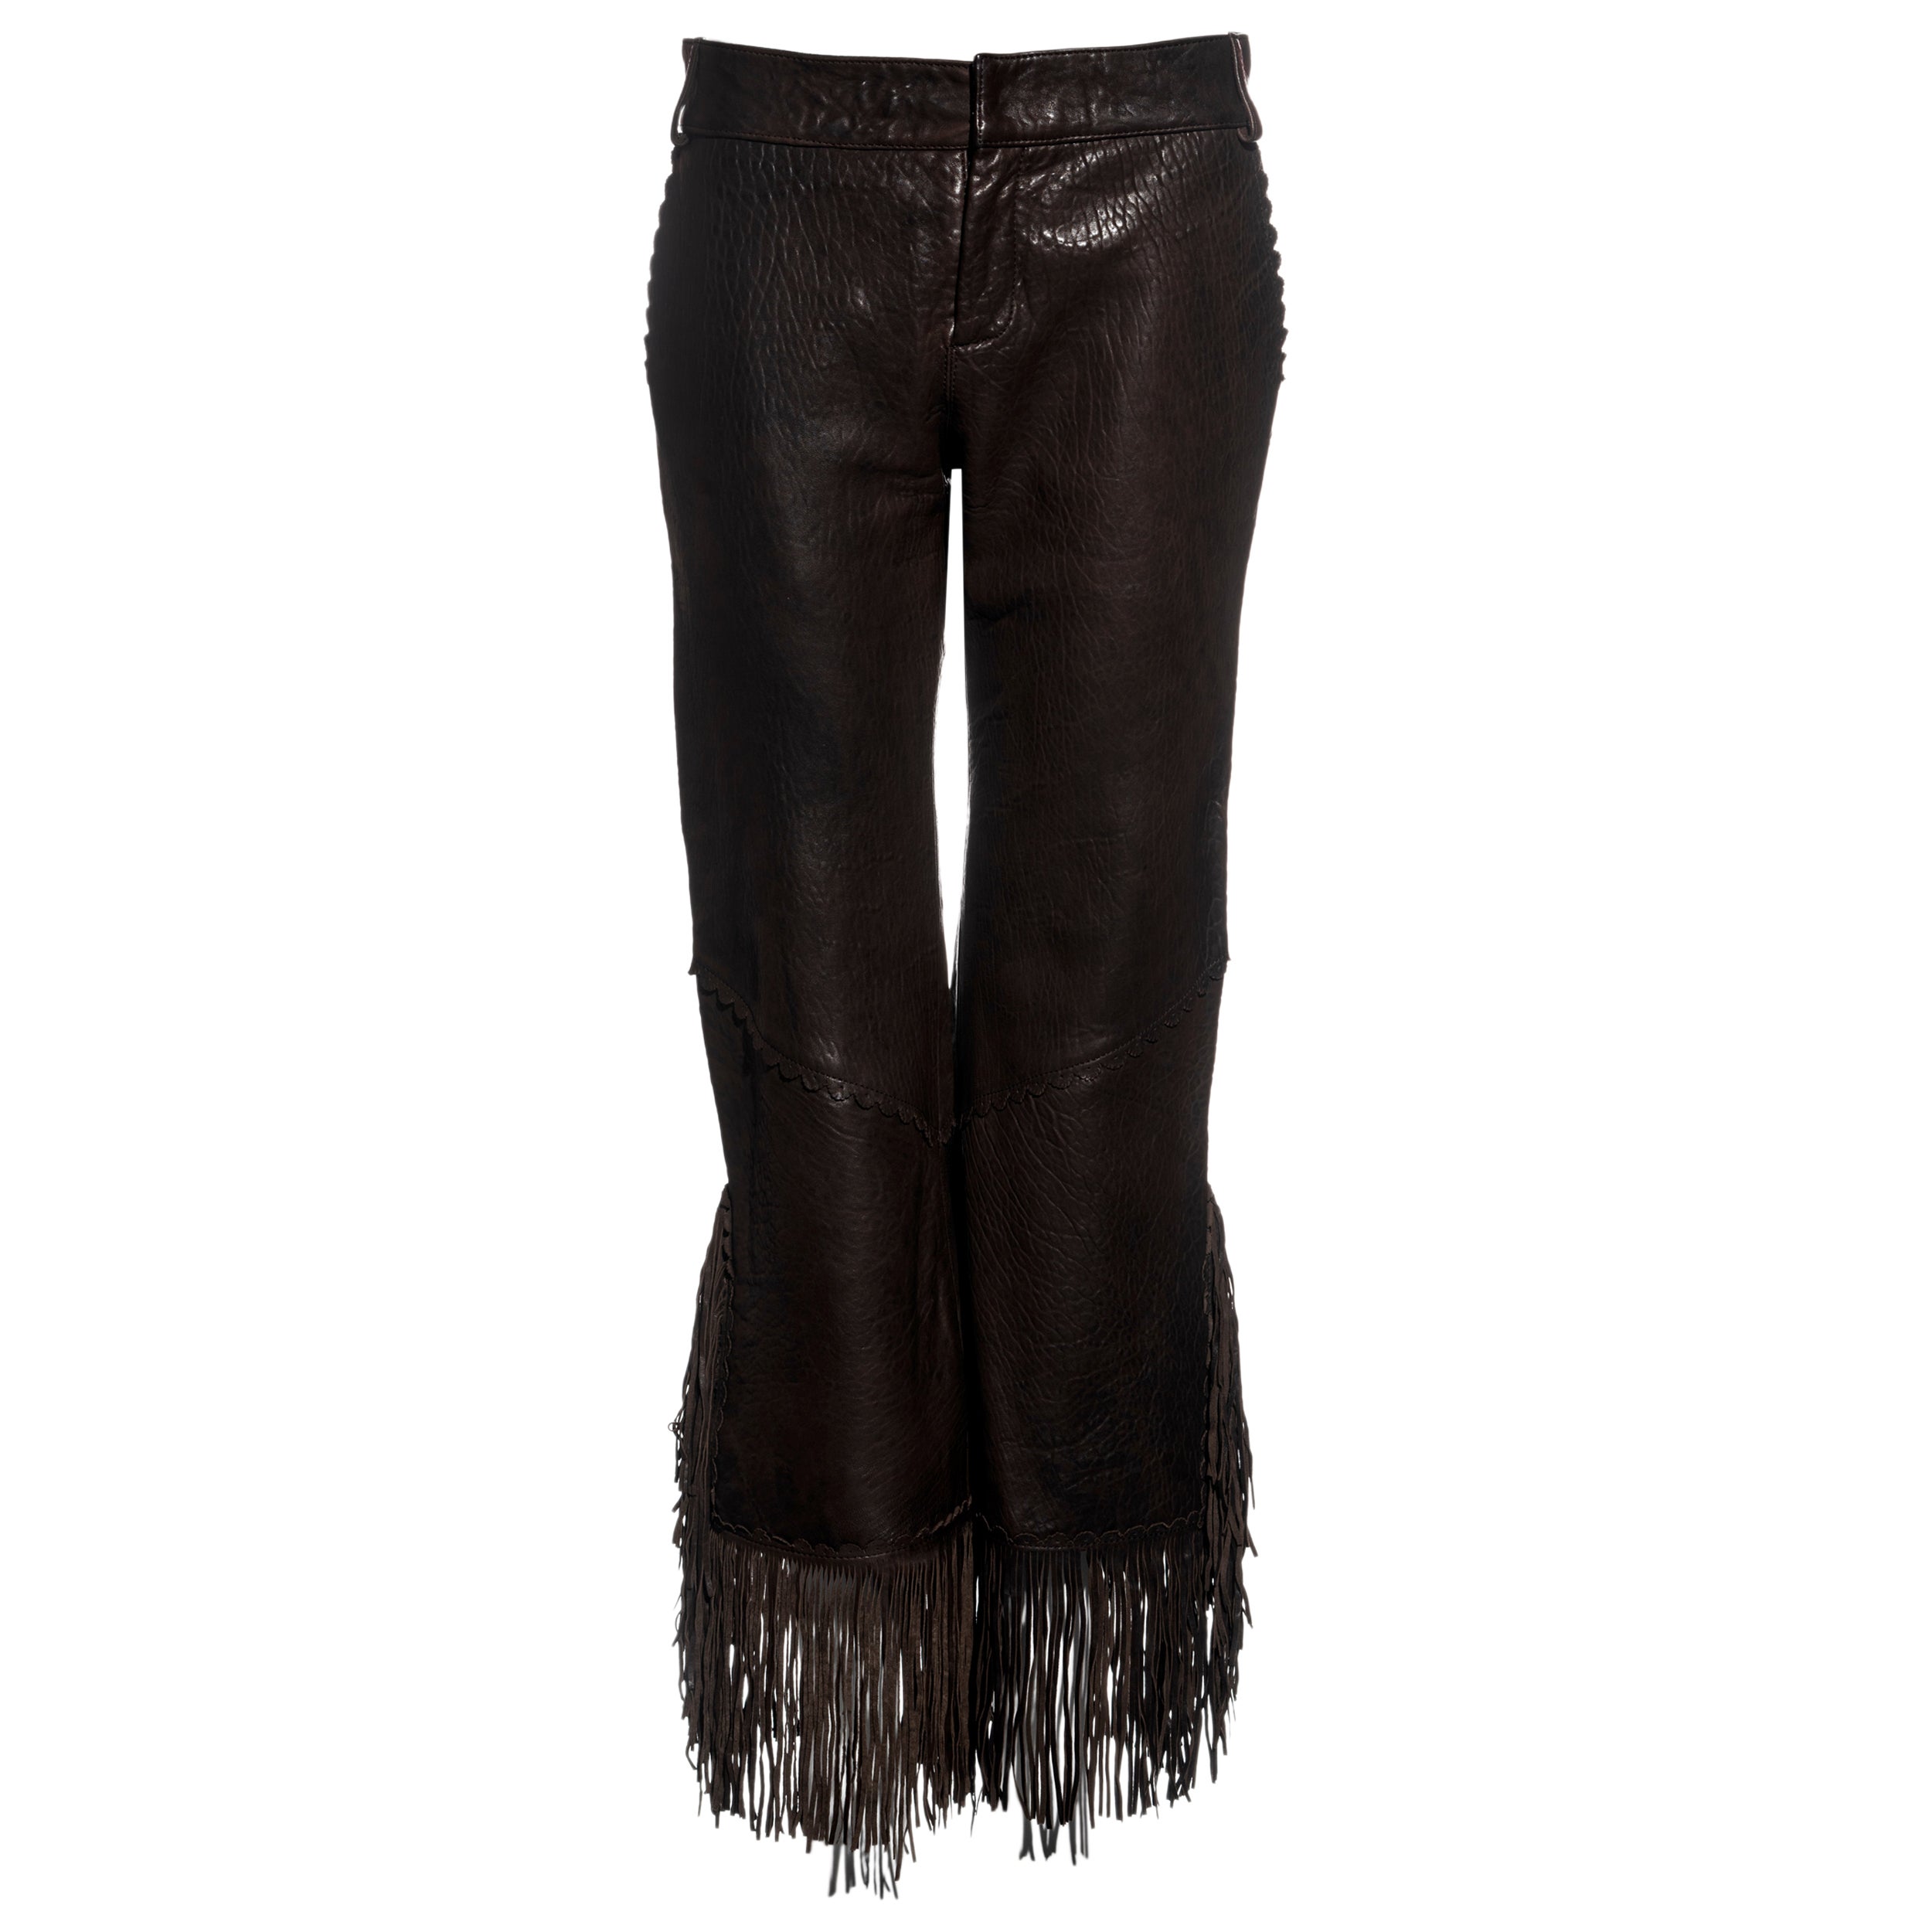 Jean Paul Gaultier brown leather pants with fringe pants, c. 2000